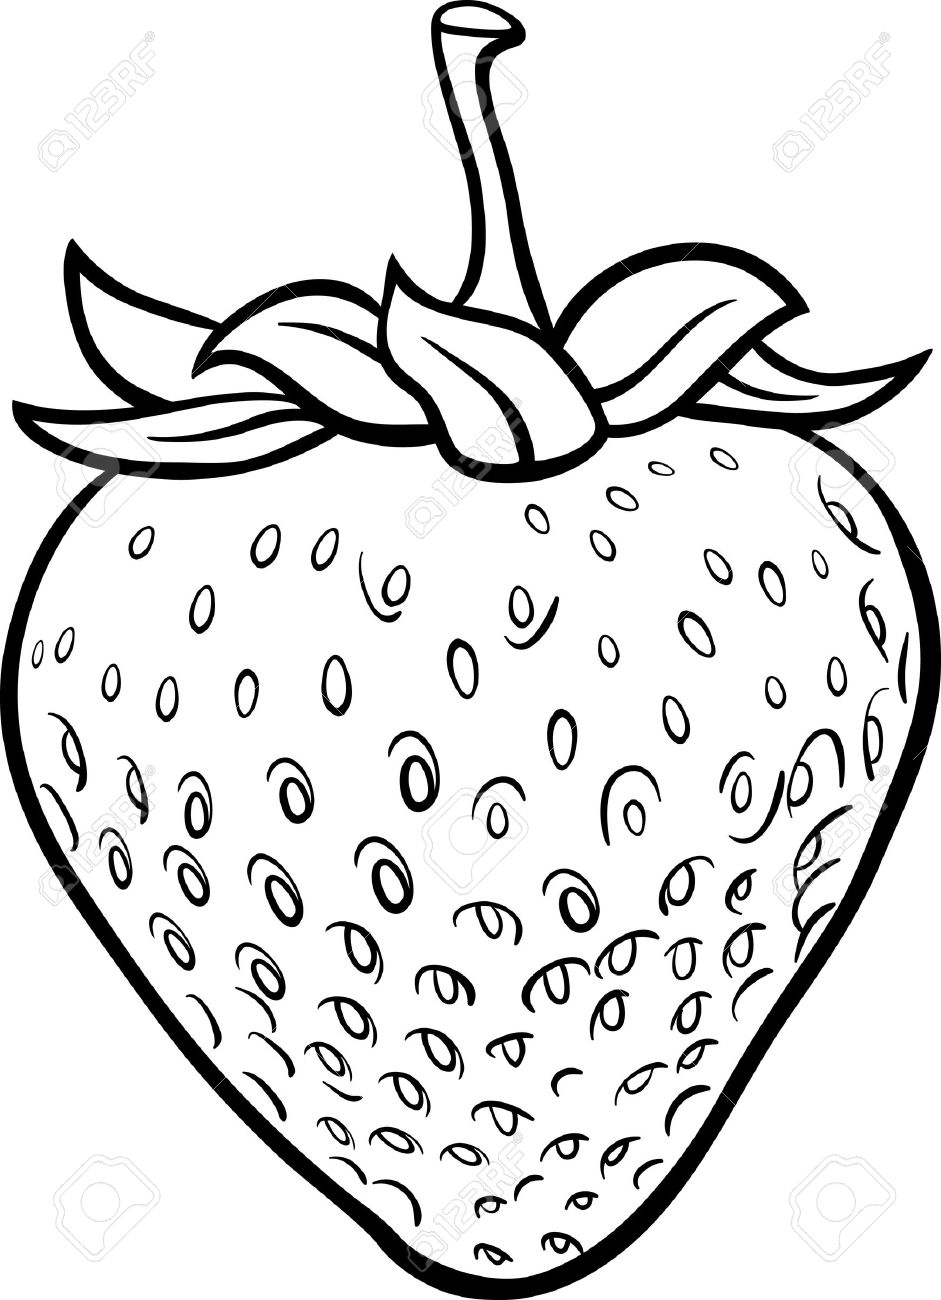 strawberries clipart black and white